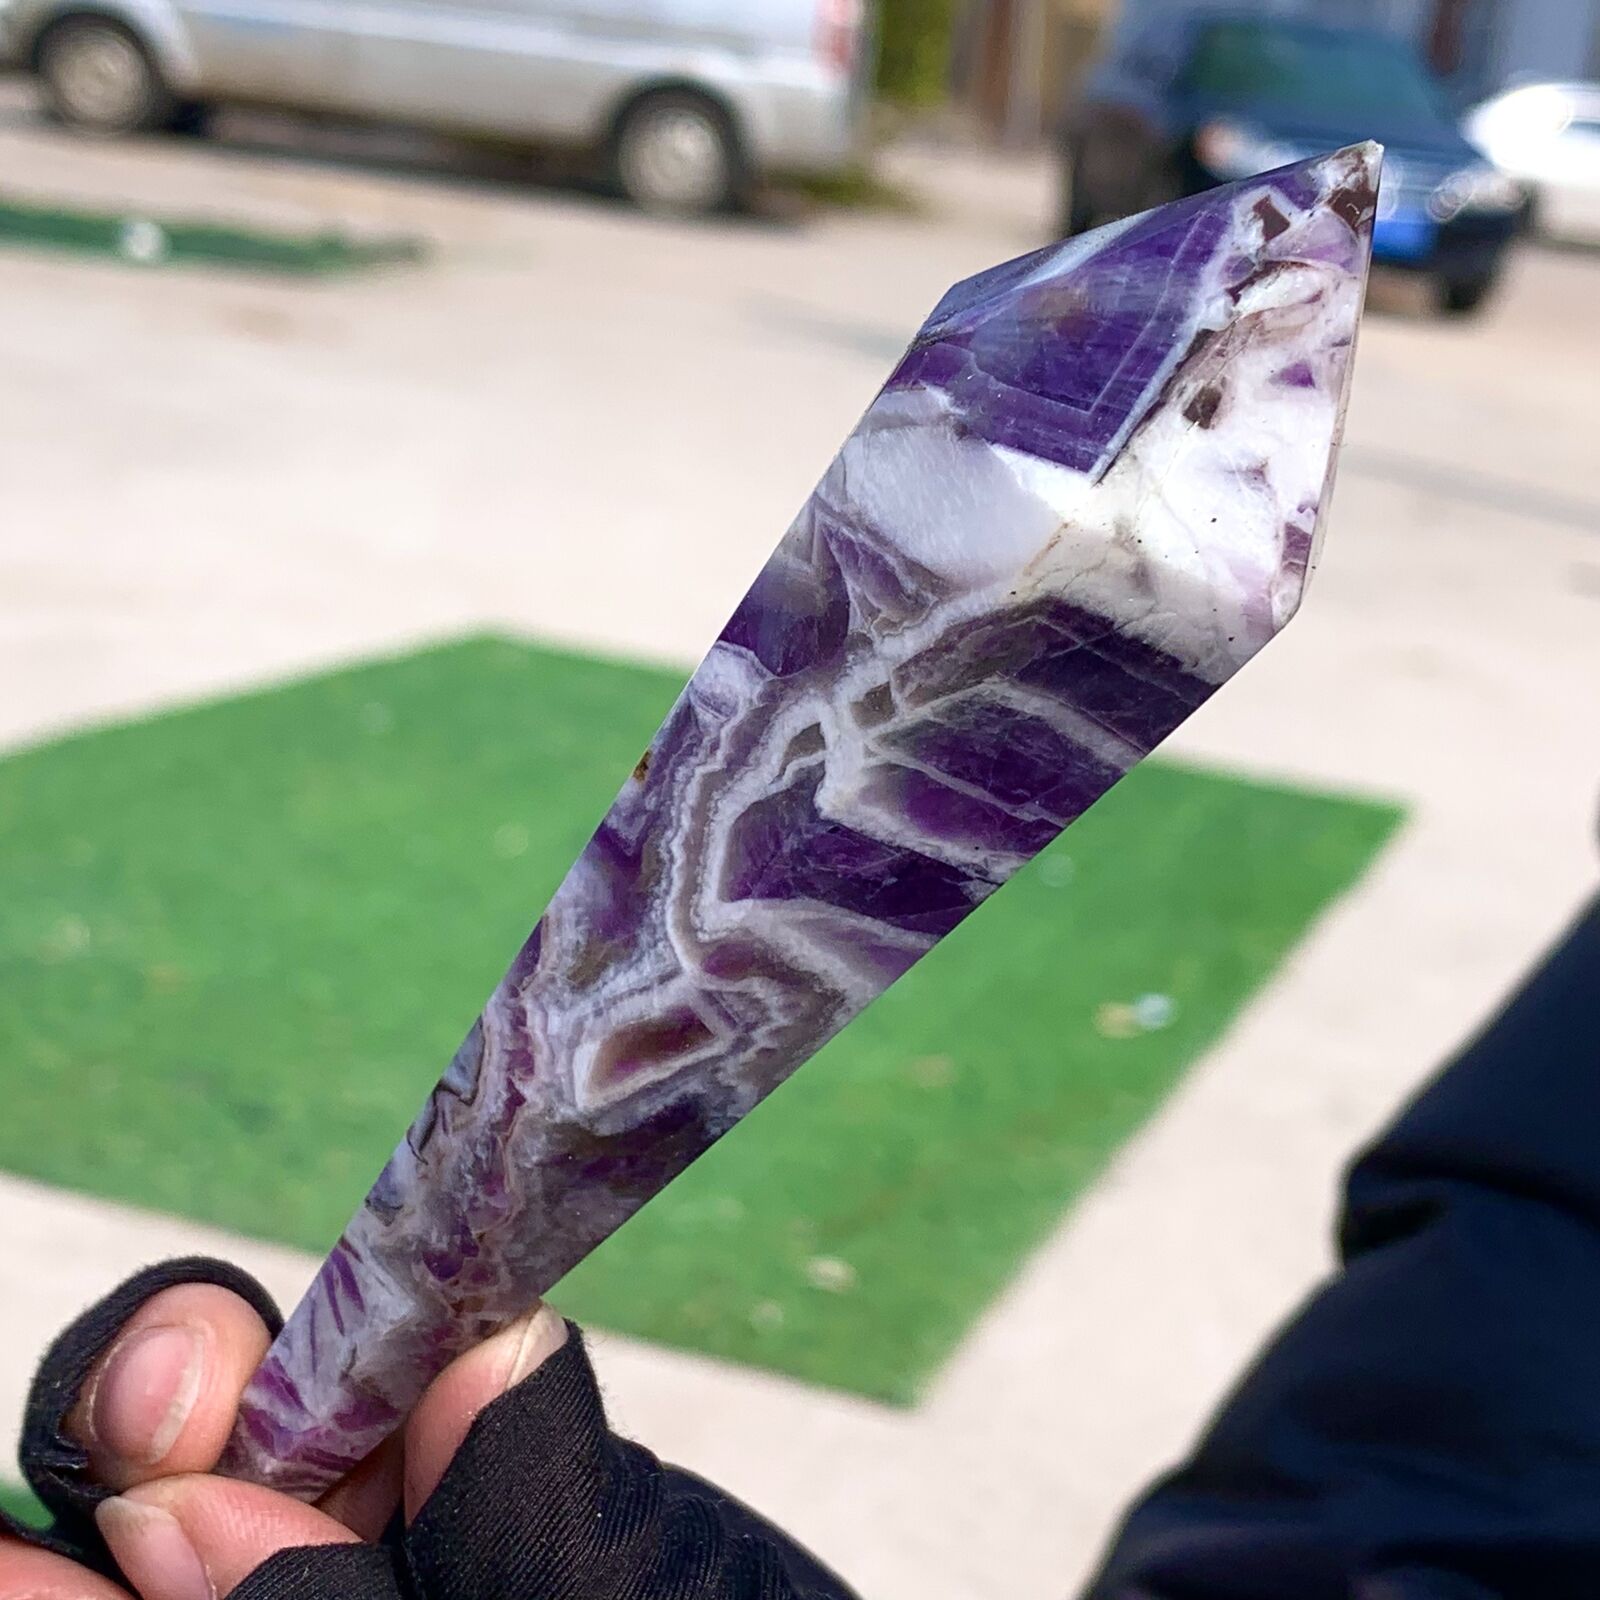 94gNatural Dream Amethyst Quartz Crystal Single End Magic Wand Targeted Therapy